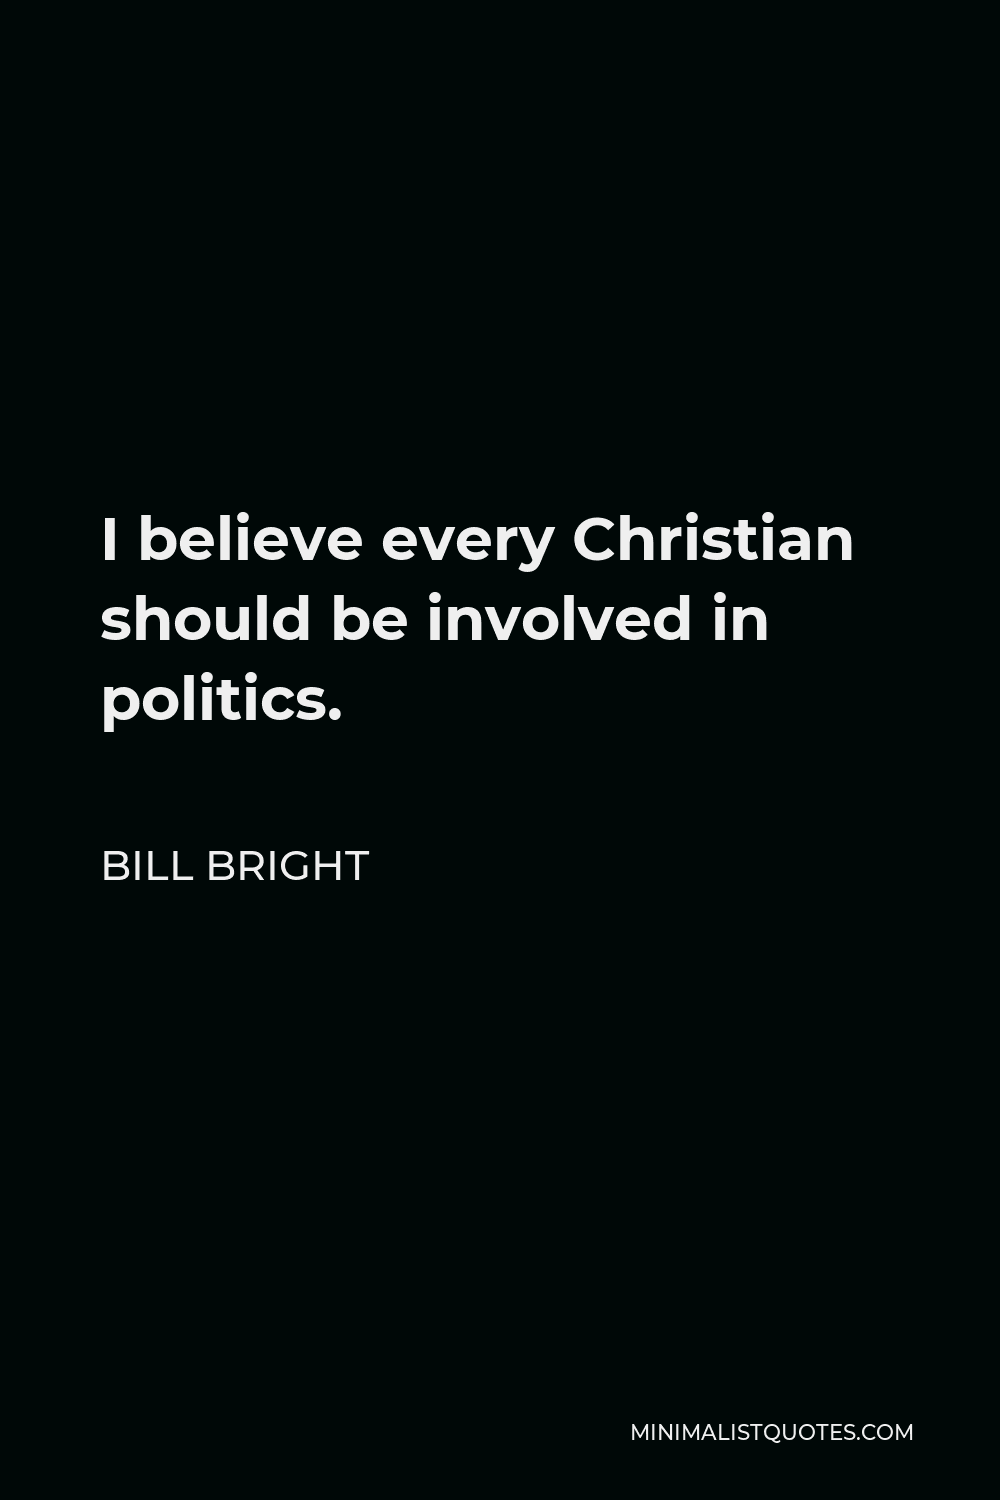 Bill Bright Quote - I believe every Christian should be involved in politics.